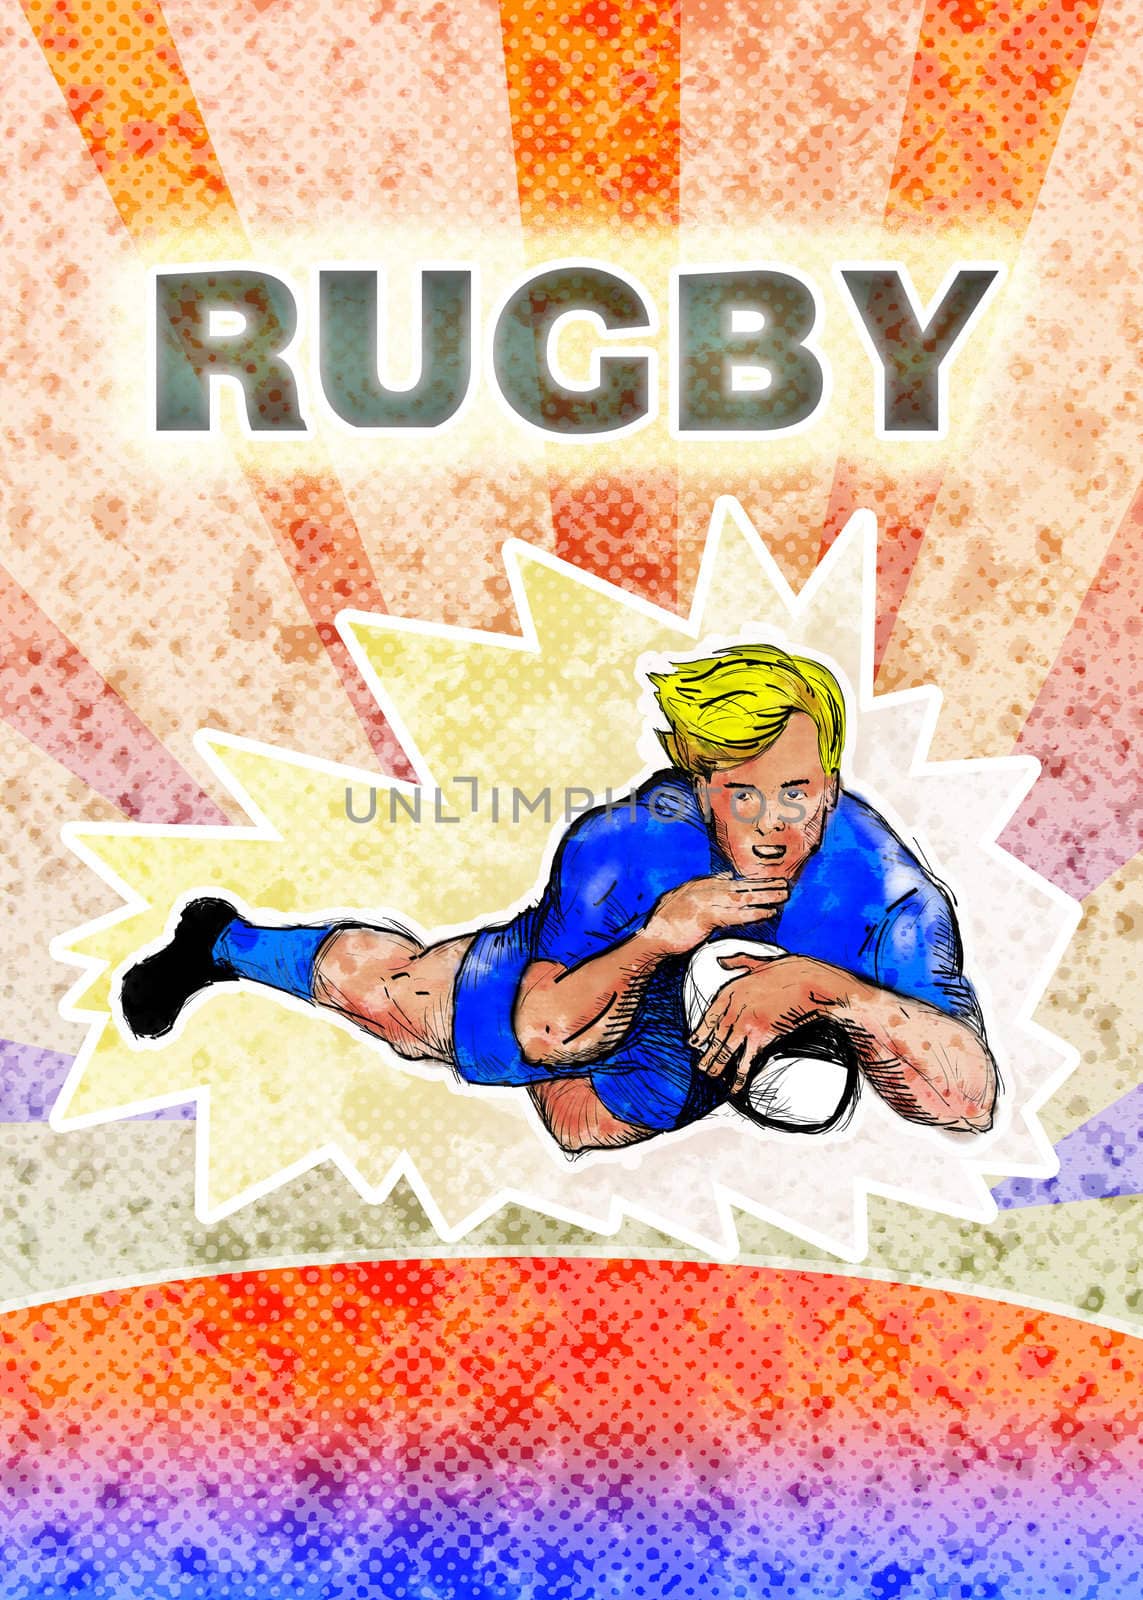 illustration of a Rugby player diving to score a try with grunge  texture and sunburst background and words rugby